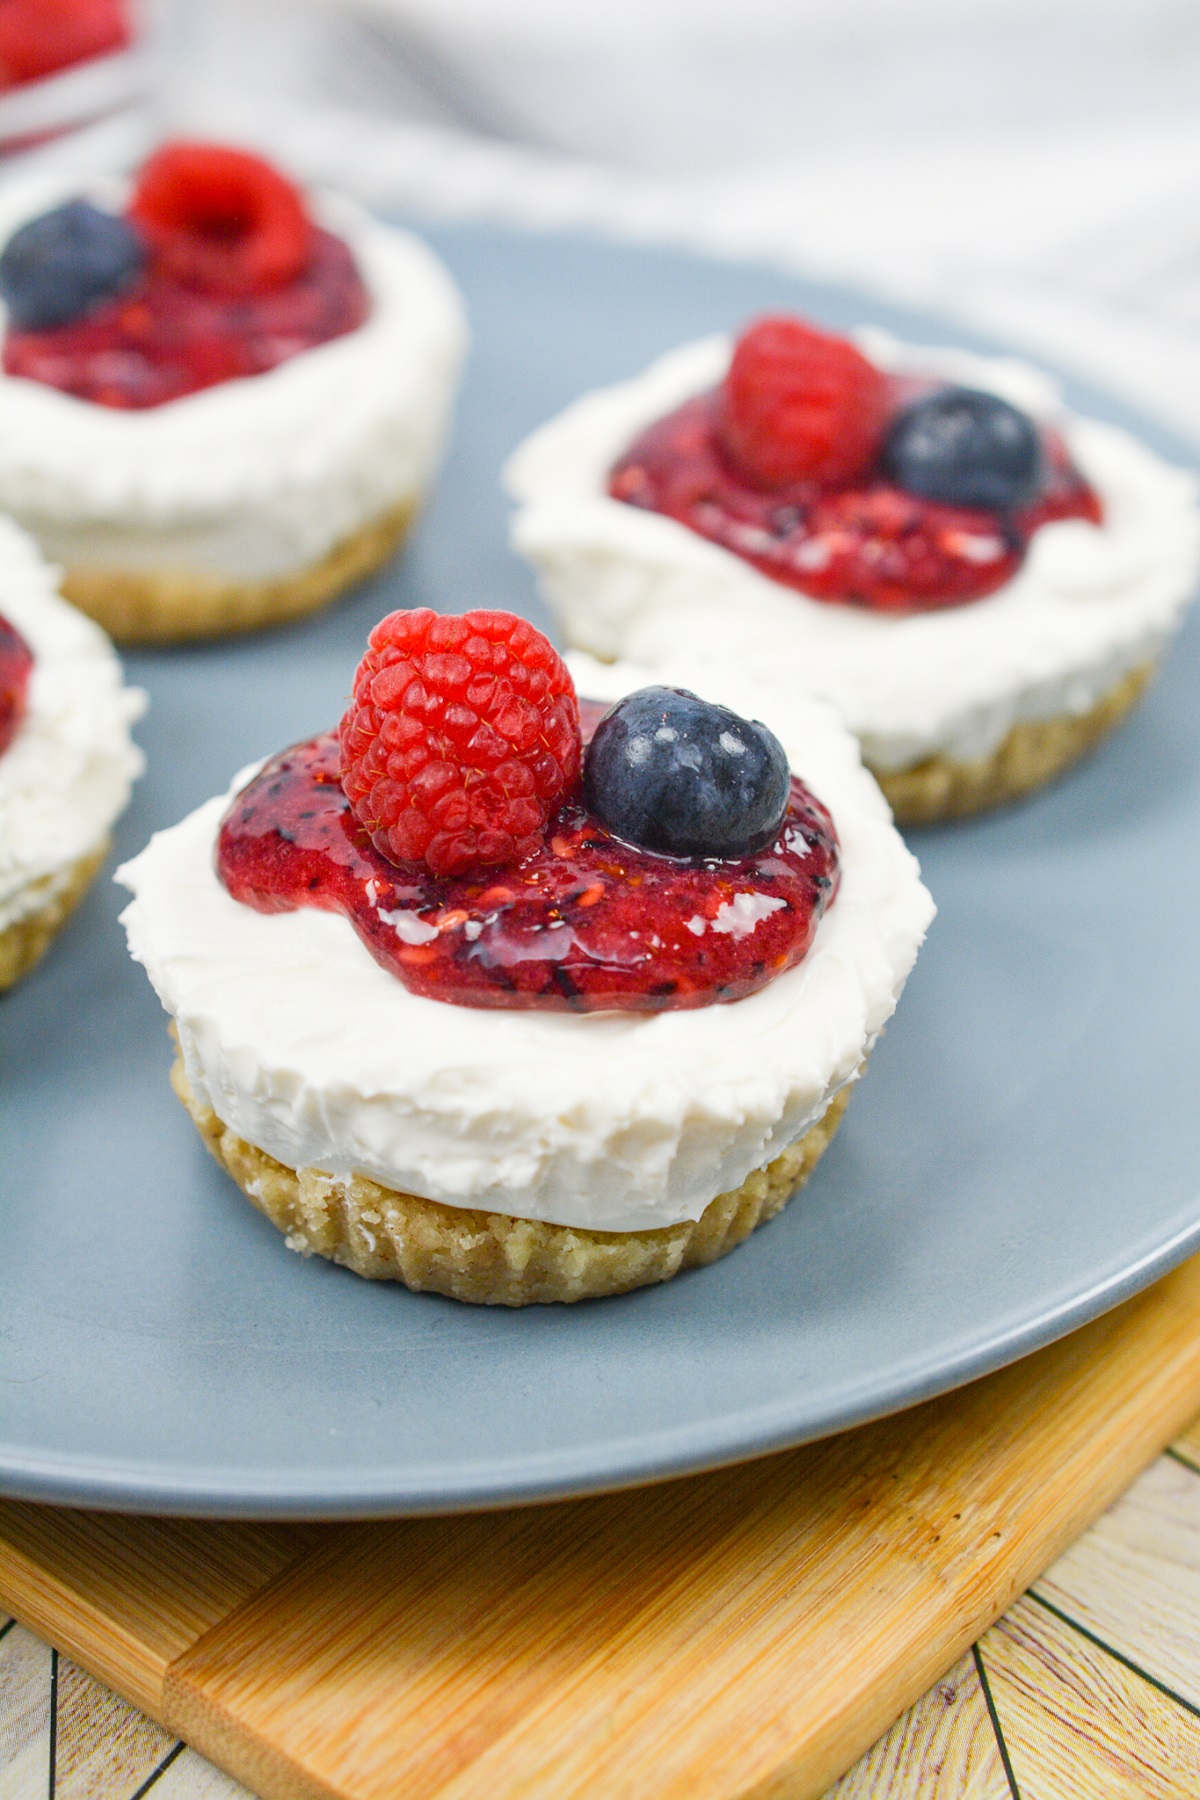 4 berry mini cheesecakes keto dessert with cream cheese sitting on a blue plate.